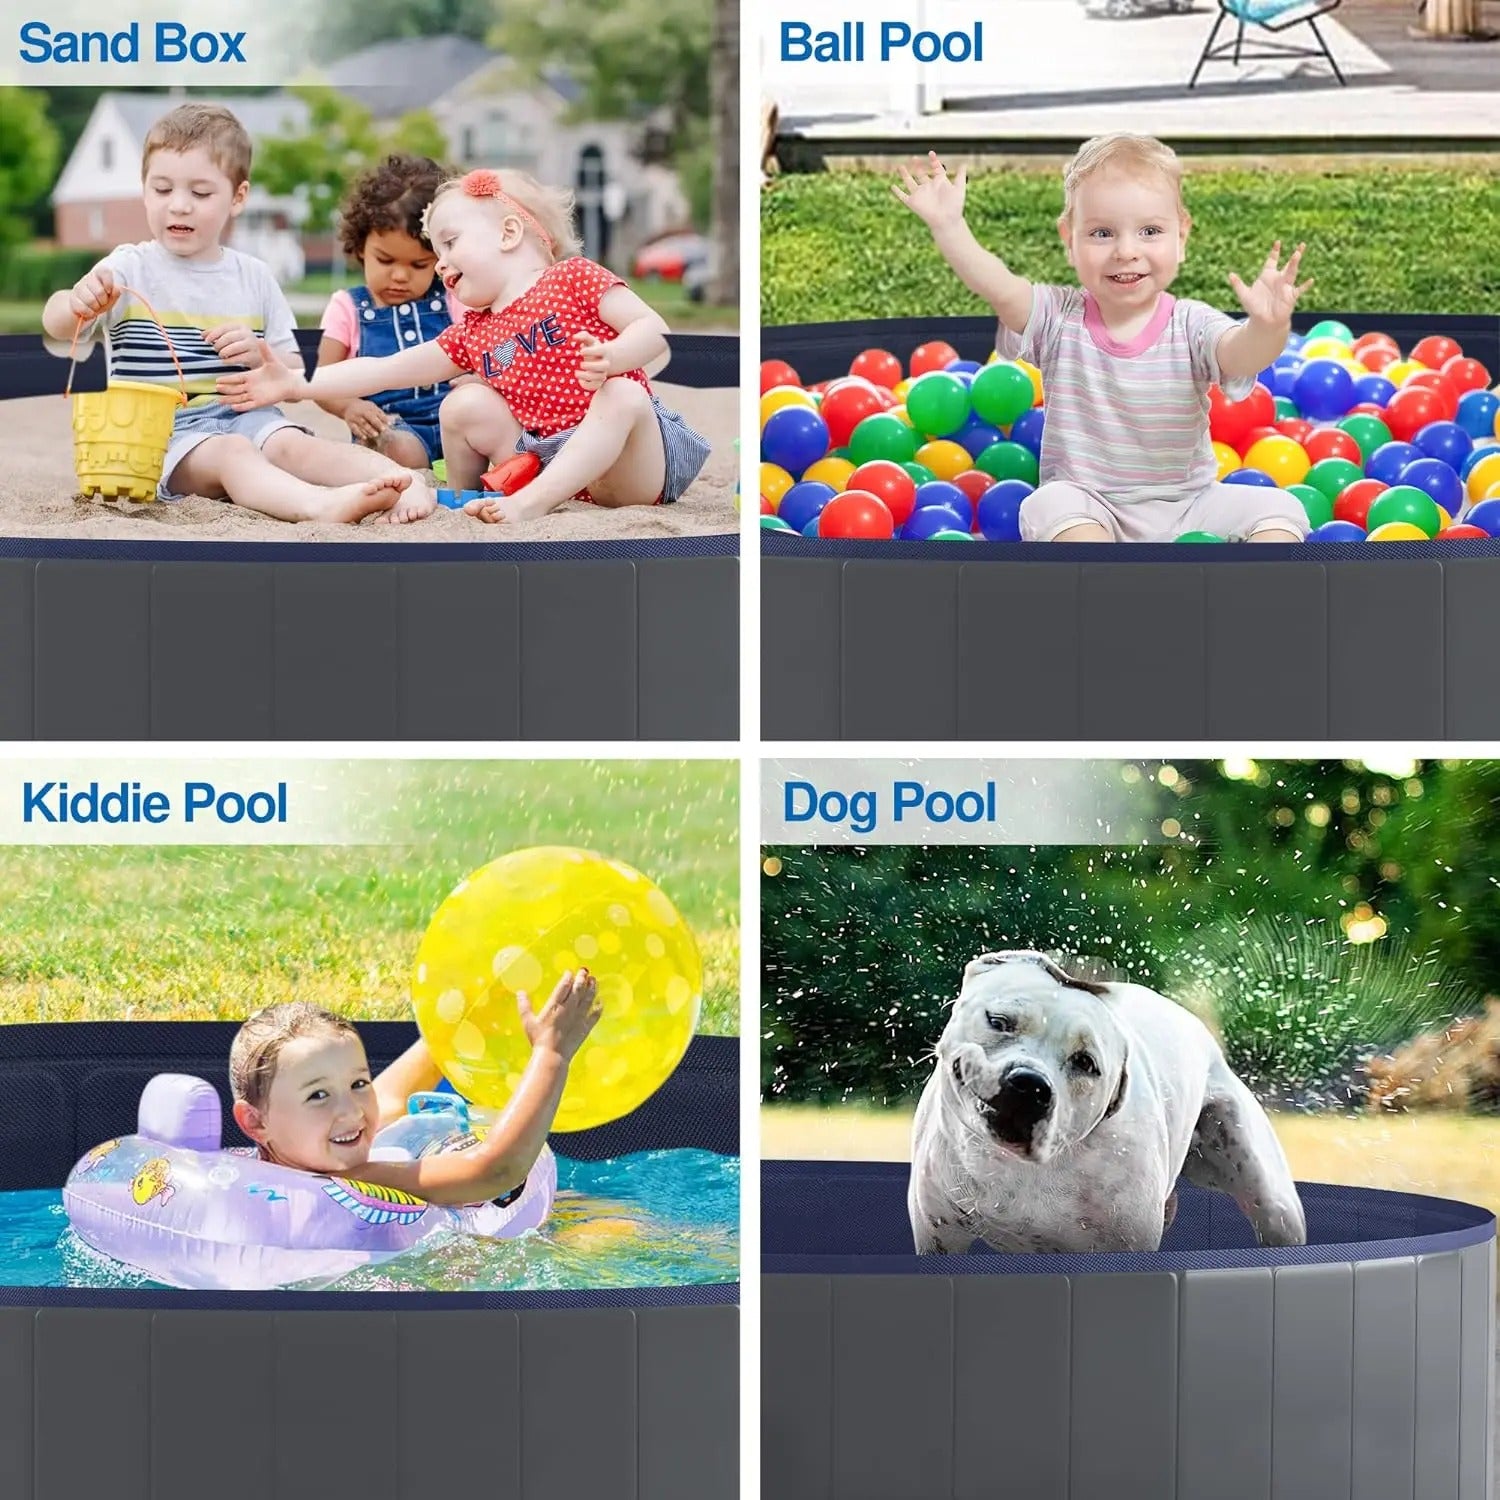 Niubya Foldable Dog Pool, Collapsible Hard Plastic Dog Swimming Pool, Portable Bath Tub for Pets Dogs and Cats, Pet Wading - Elite Edge Essentials 